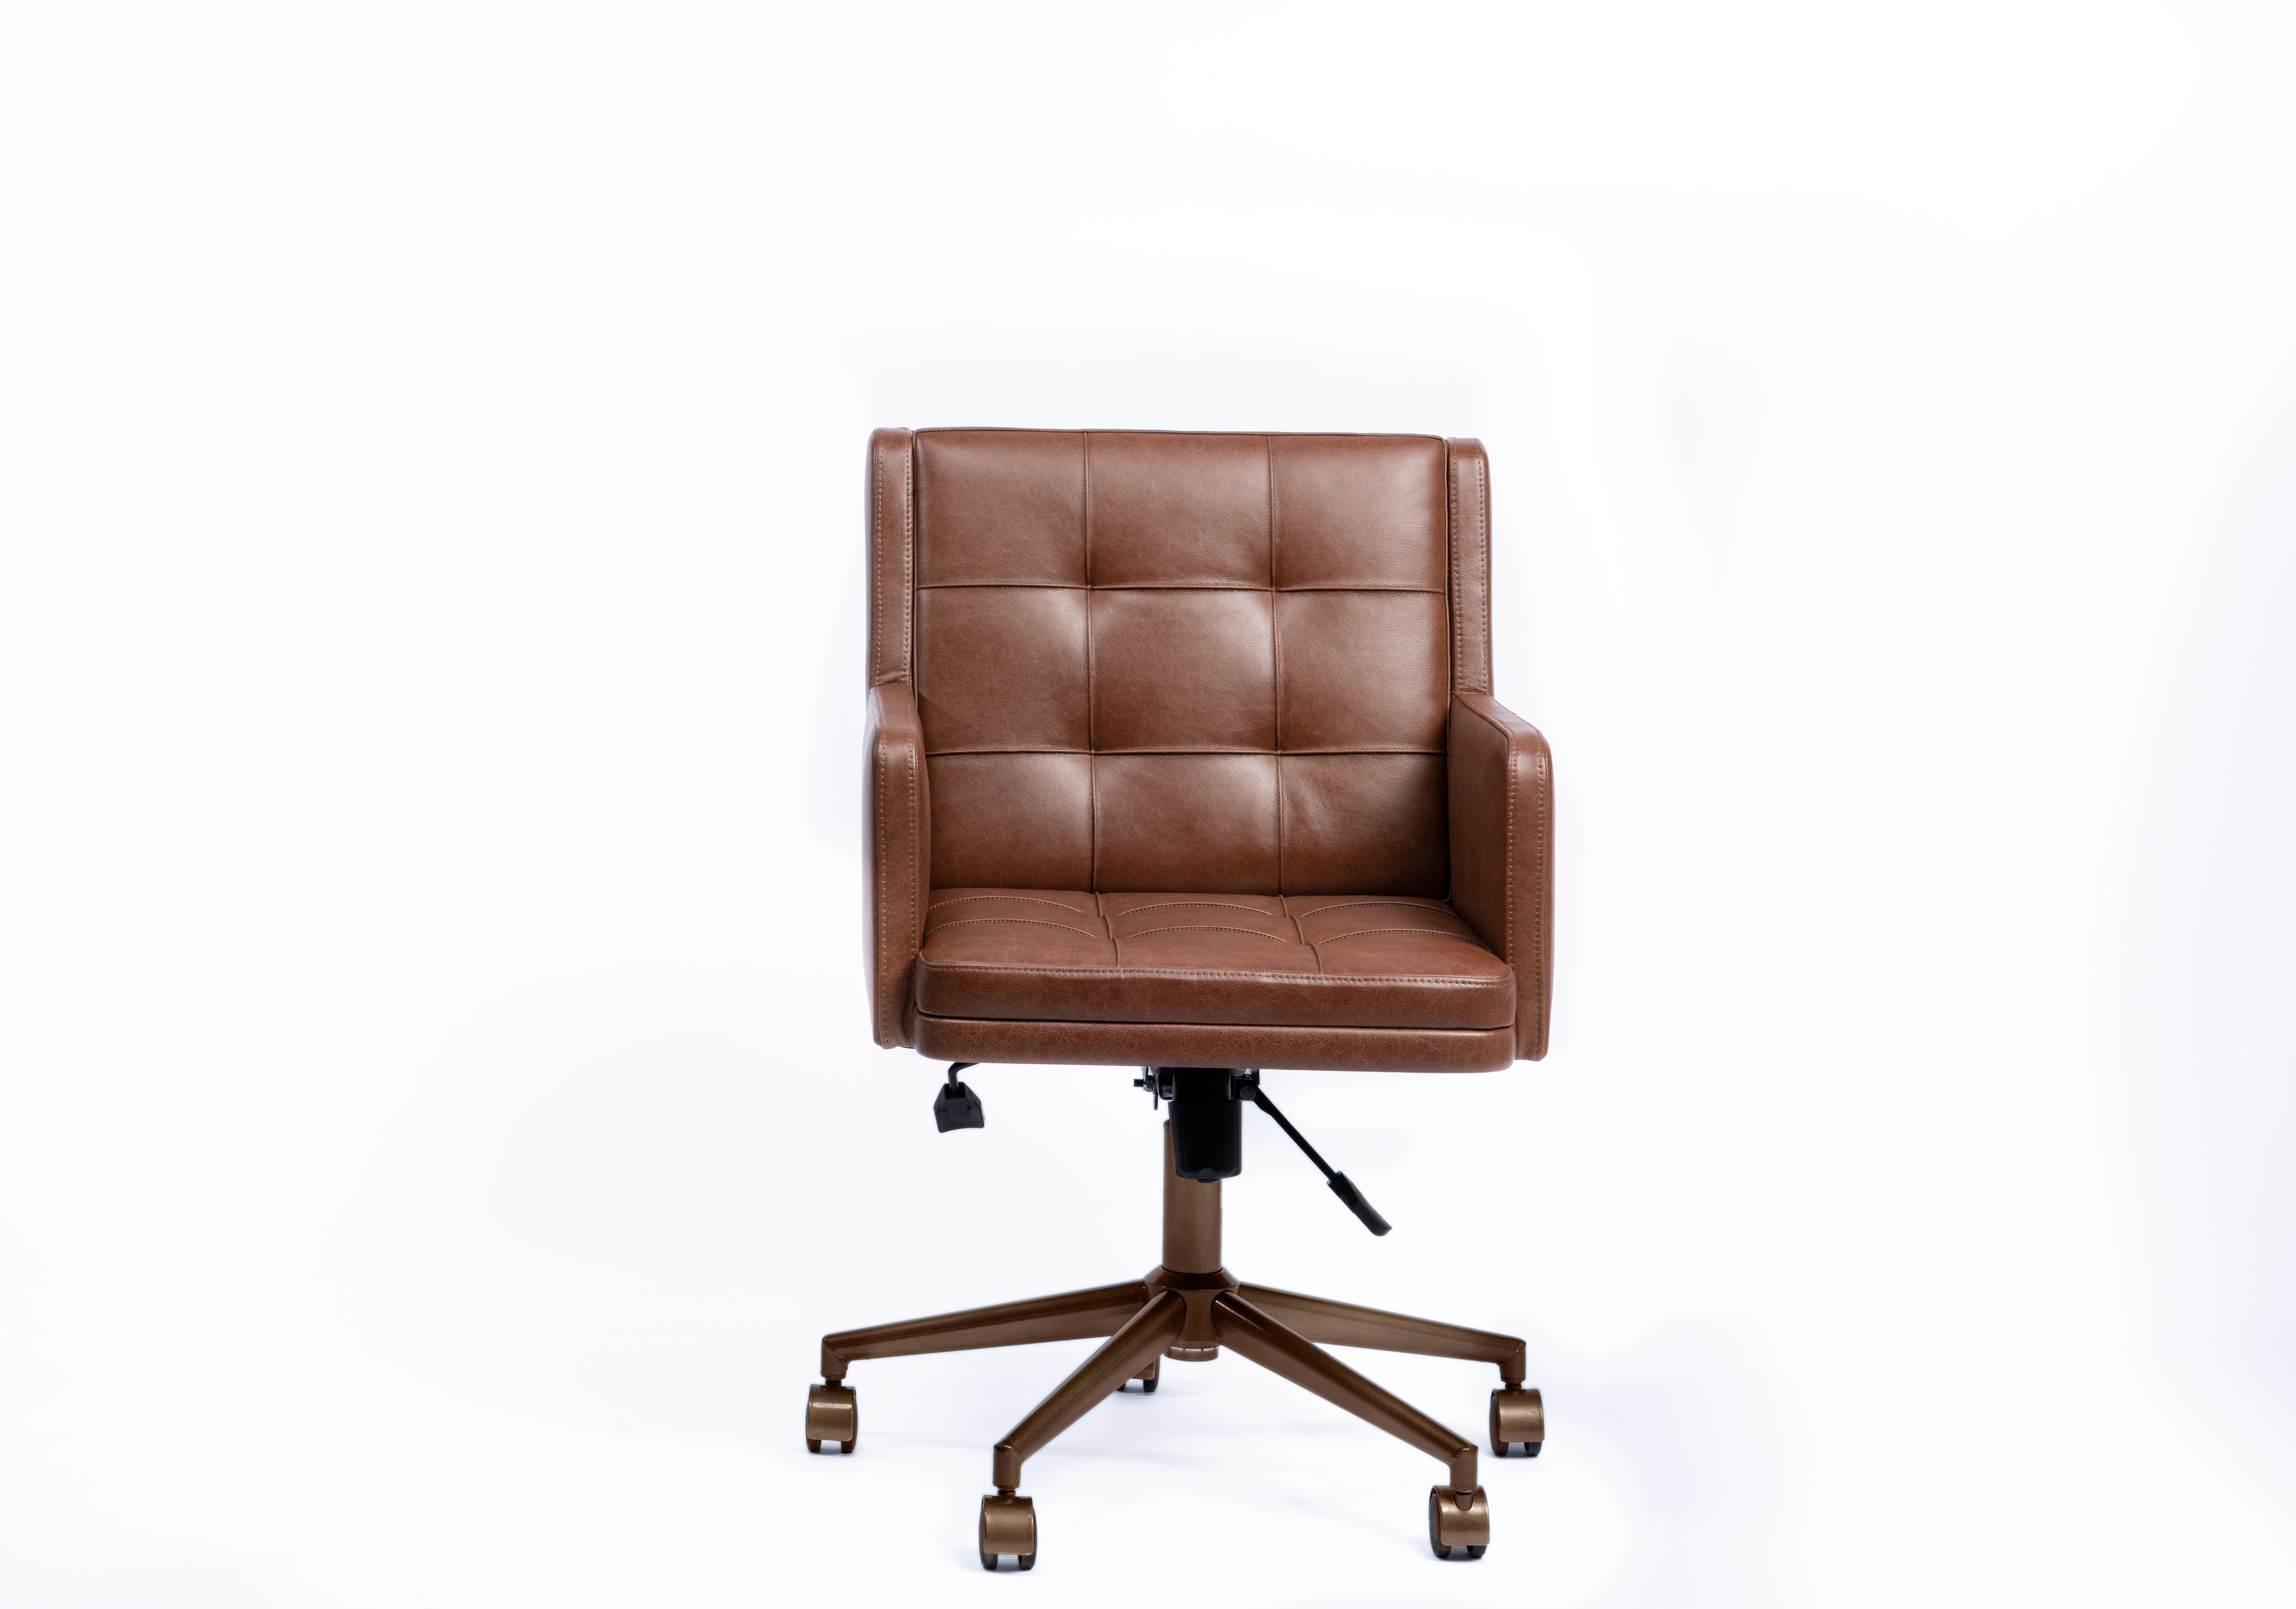 Darwin added wheels to the office chair in 19th century.
In the 1970s ergonomics was added to design criteria.
Today, it is the key element for whom spends long hours in the office.
Office chair consists a solid plywood body, leather upholstery